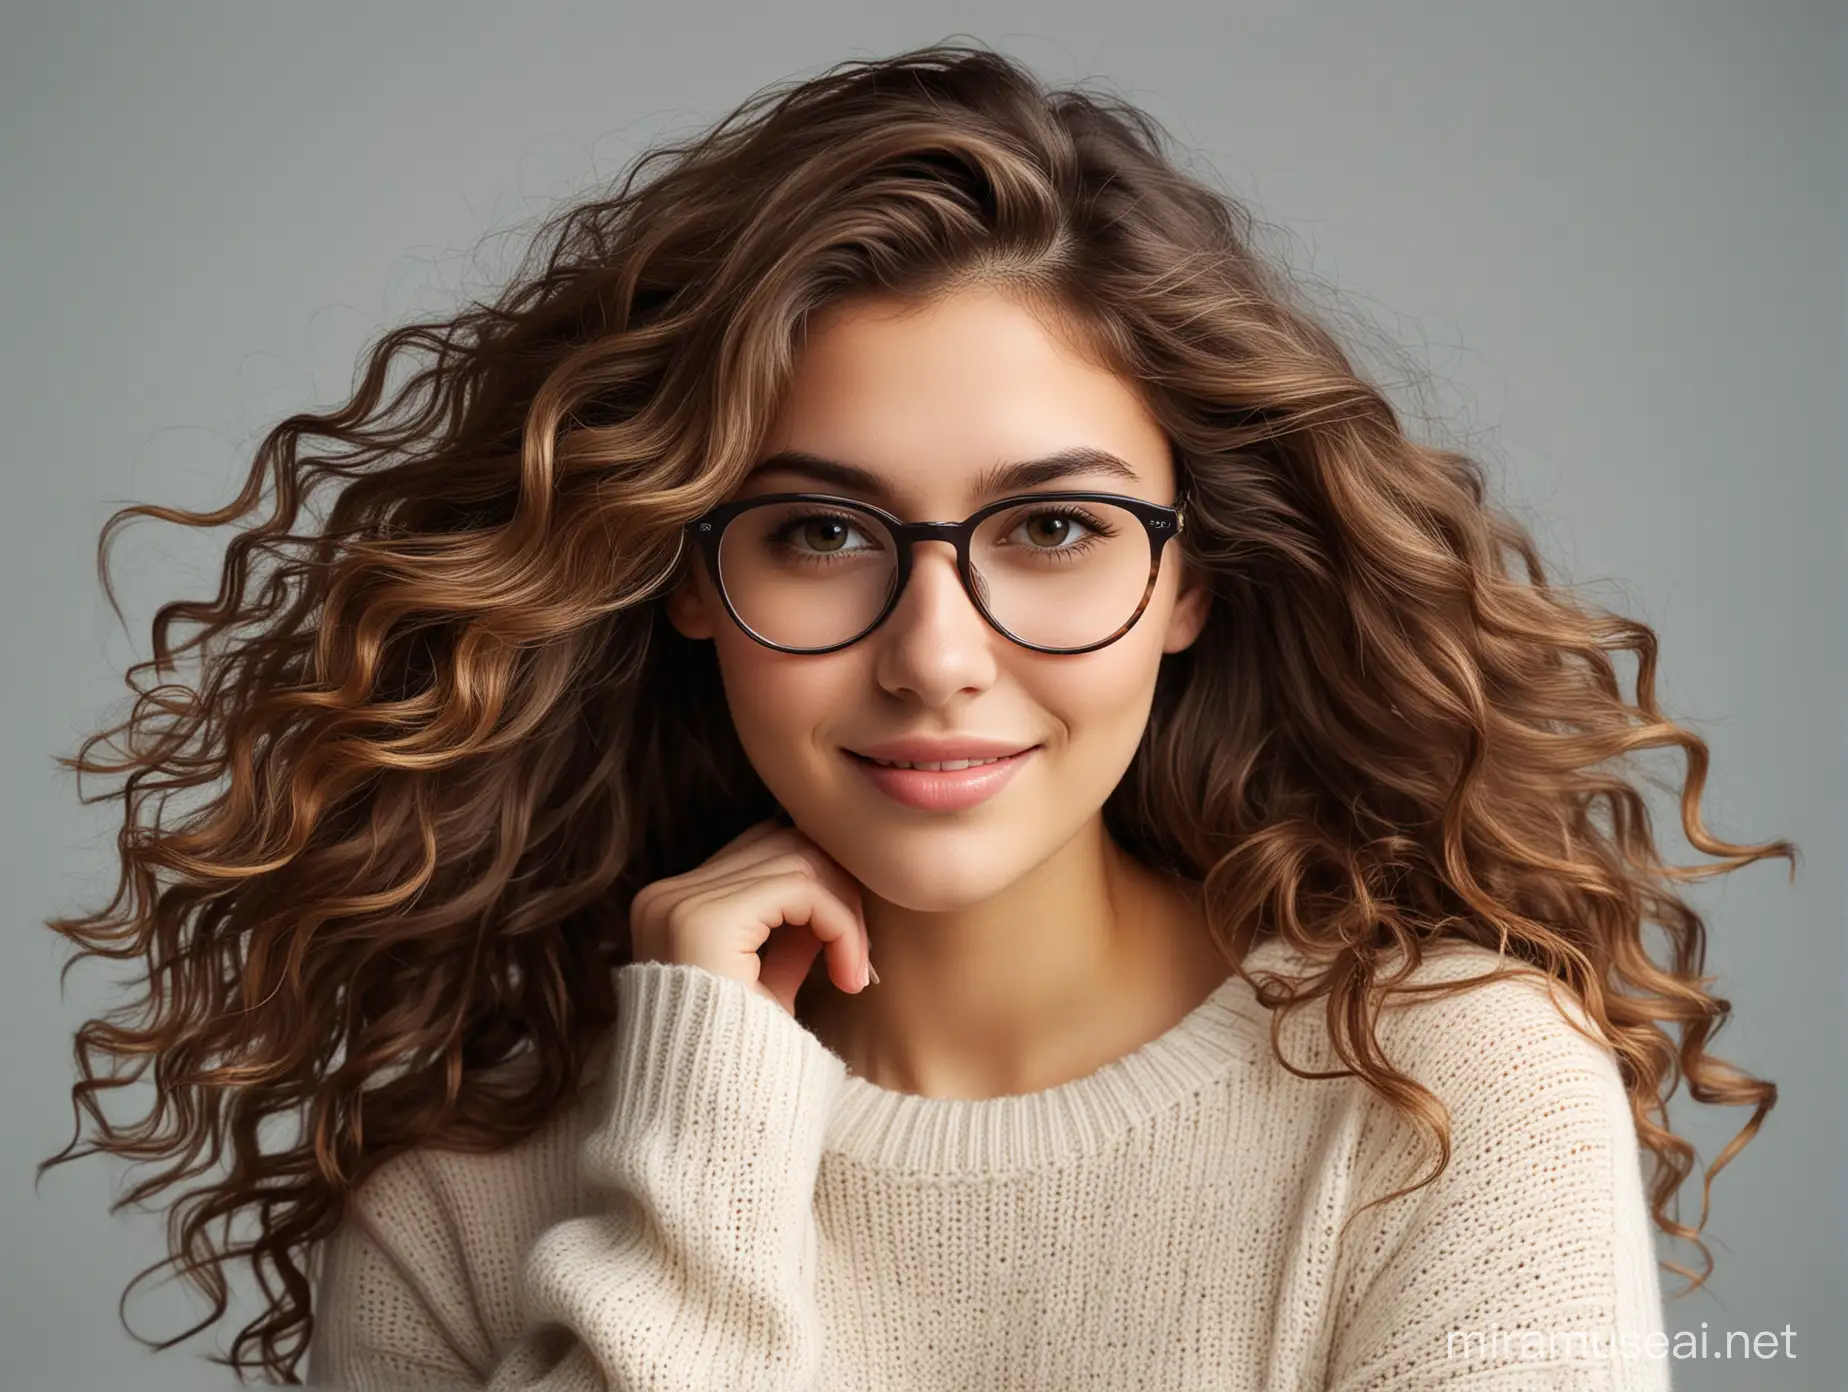 Captivating Young Girl with Flowing Hair and Stylish Glasses